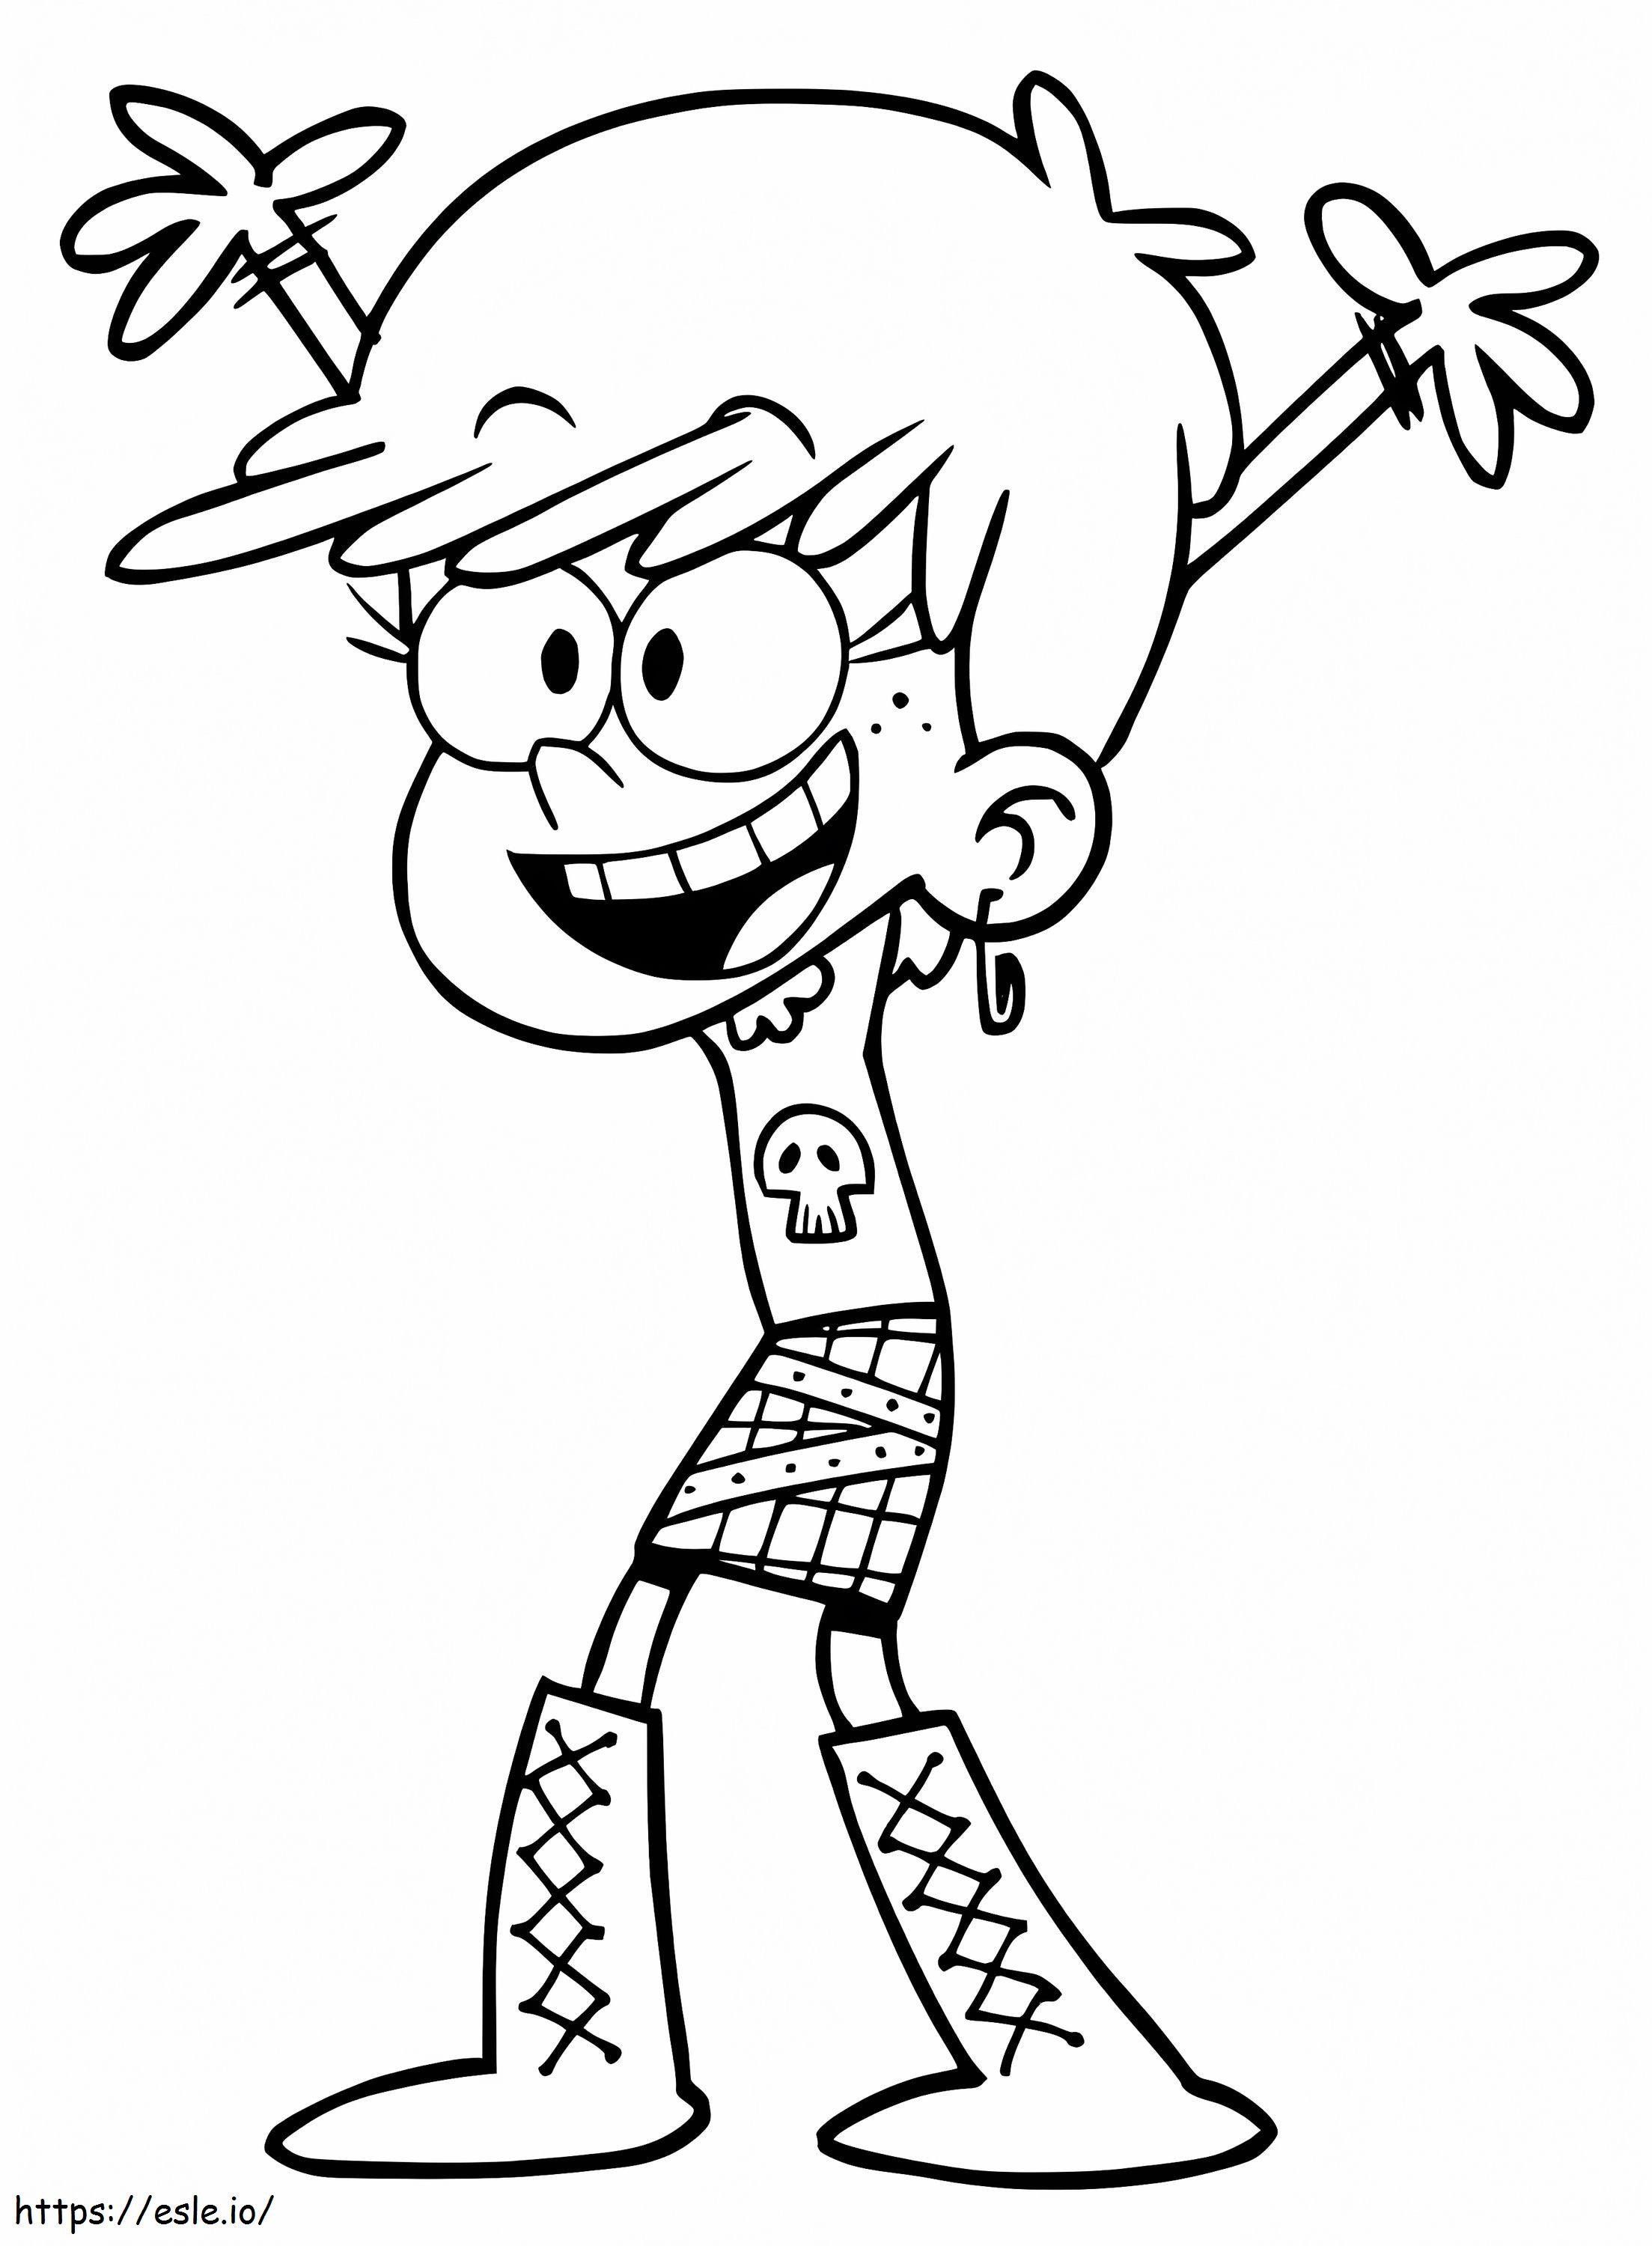 Luna Loud From Loud House coloring page